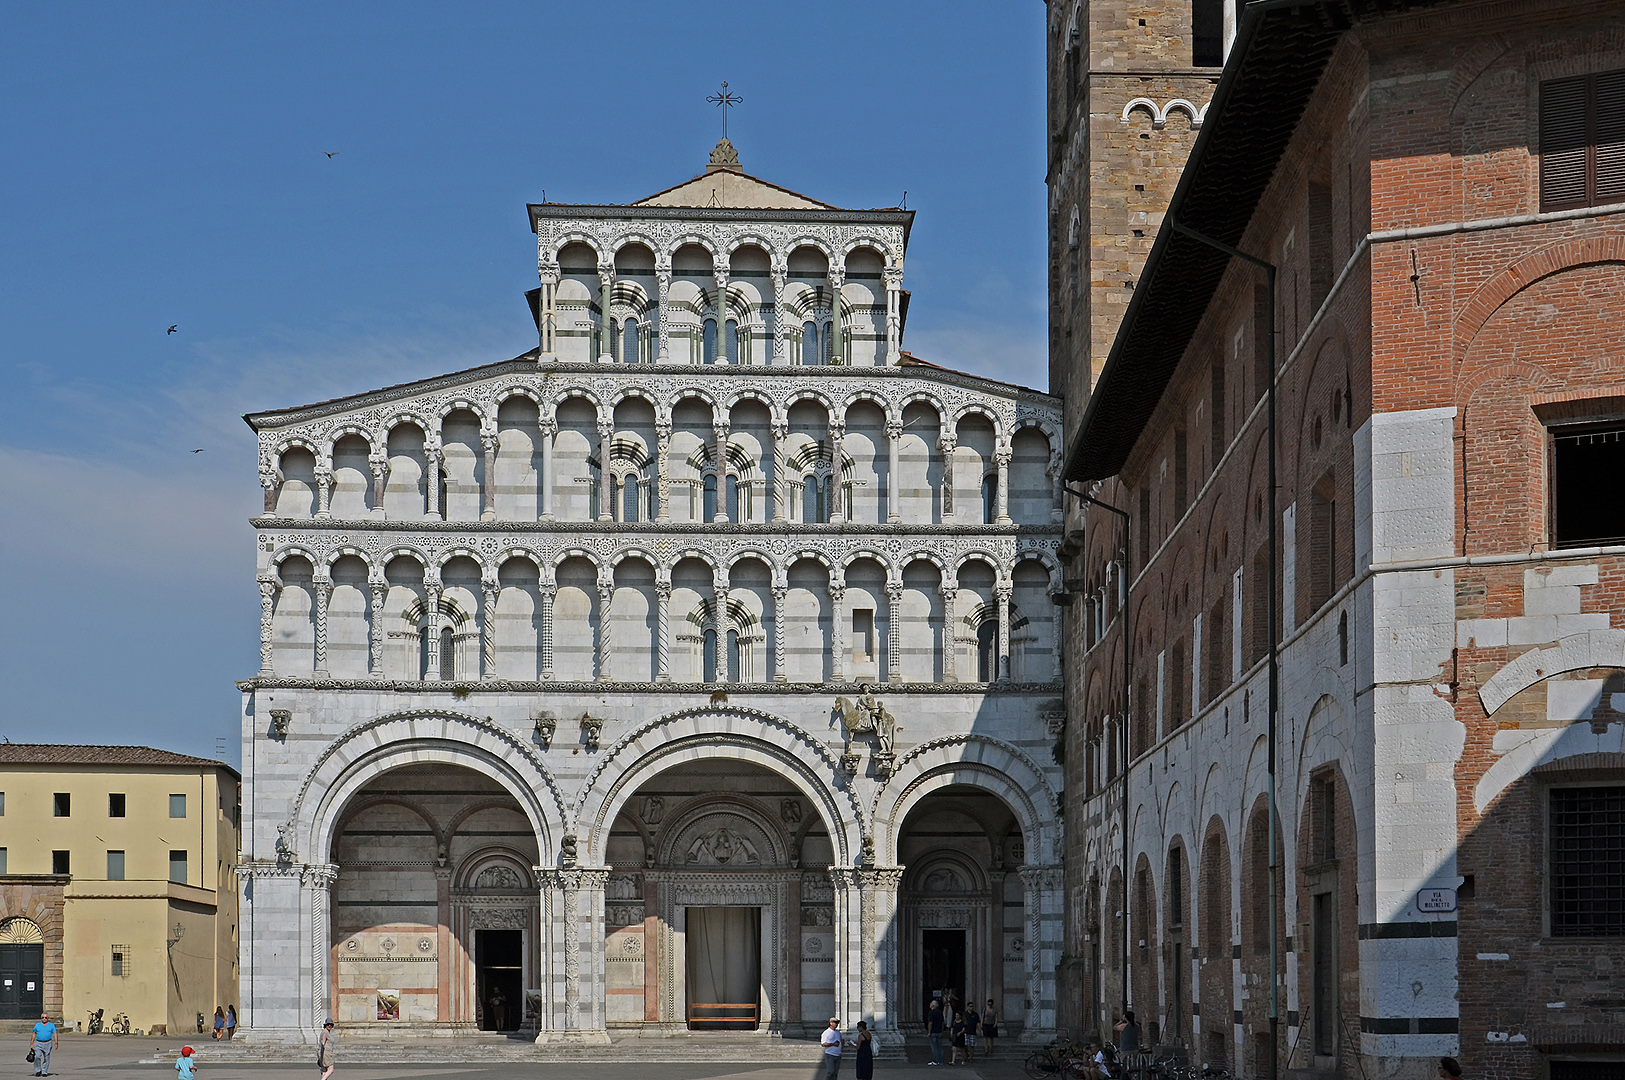 Kathedraal van Lucca, Toscane, Italië; Lucca Cathedral, Lucca, Tuscany, Italy